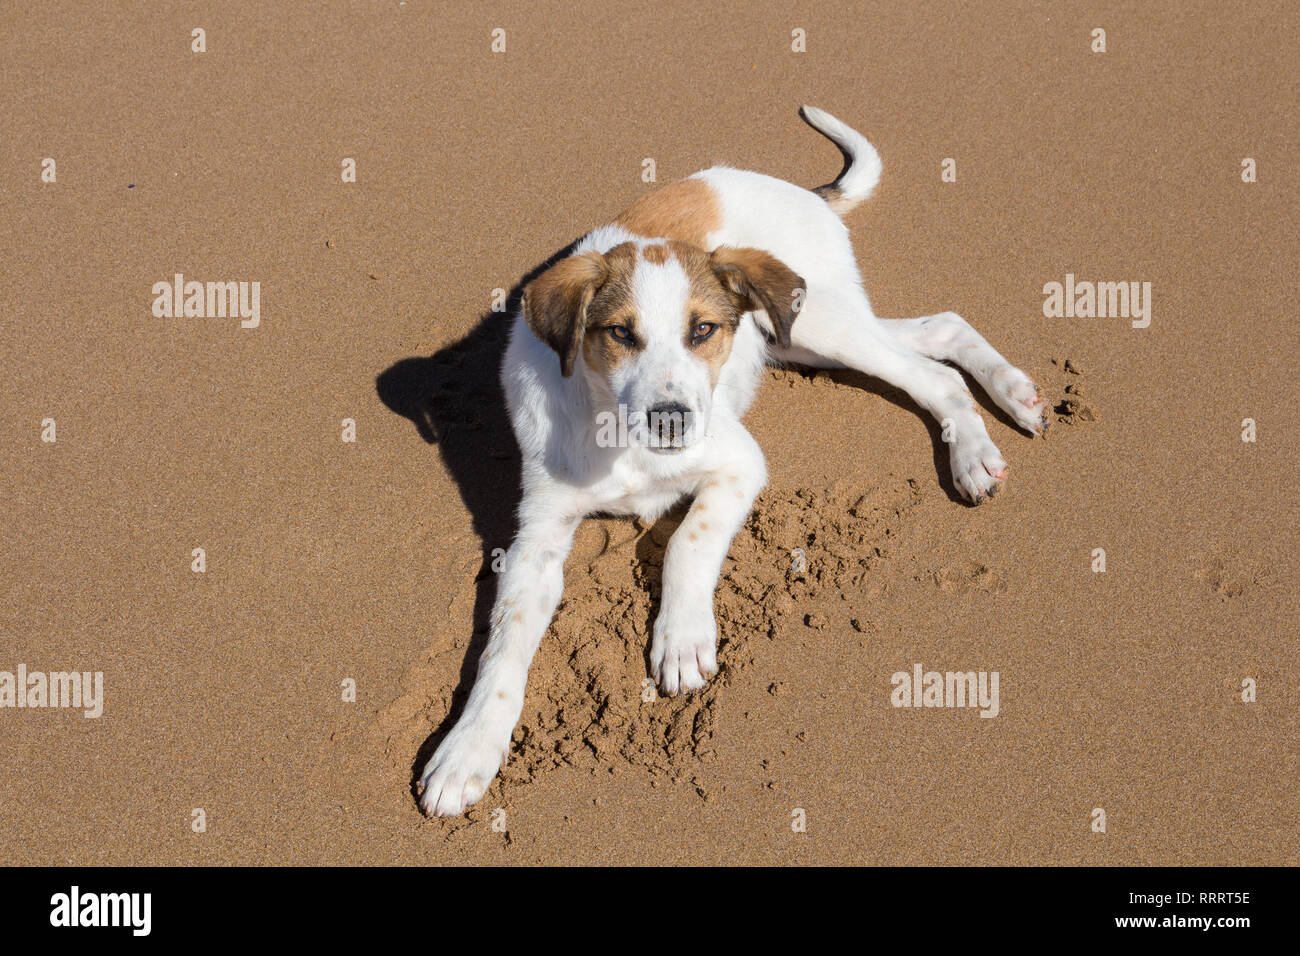 Portrait of a dog, resting on the beach. White fur with brown spots. Living free. Sidi Kaouki, Morocco. Stock Photo